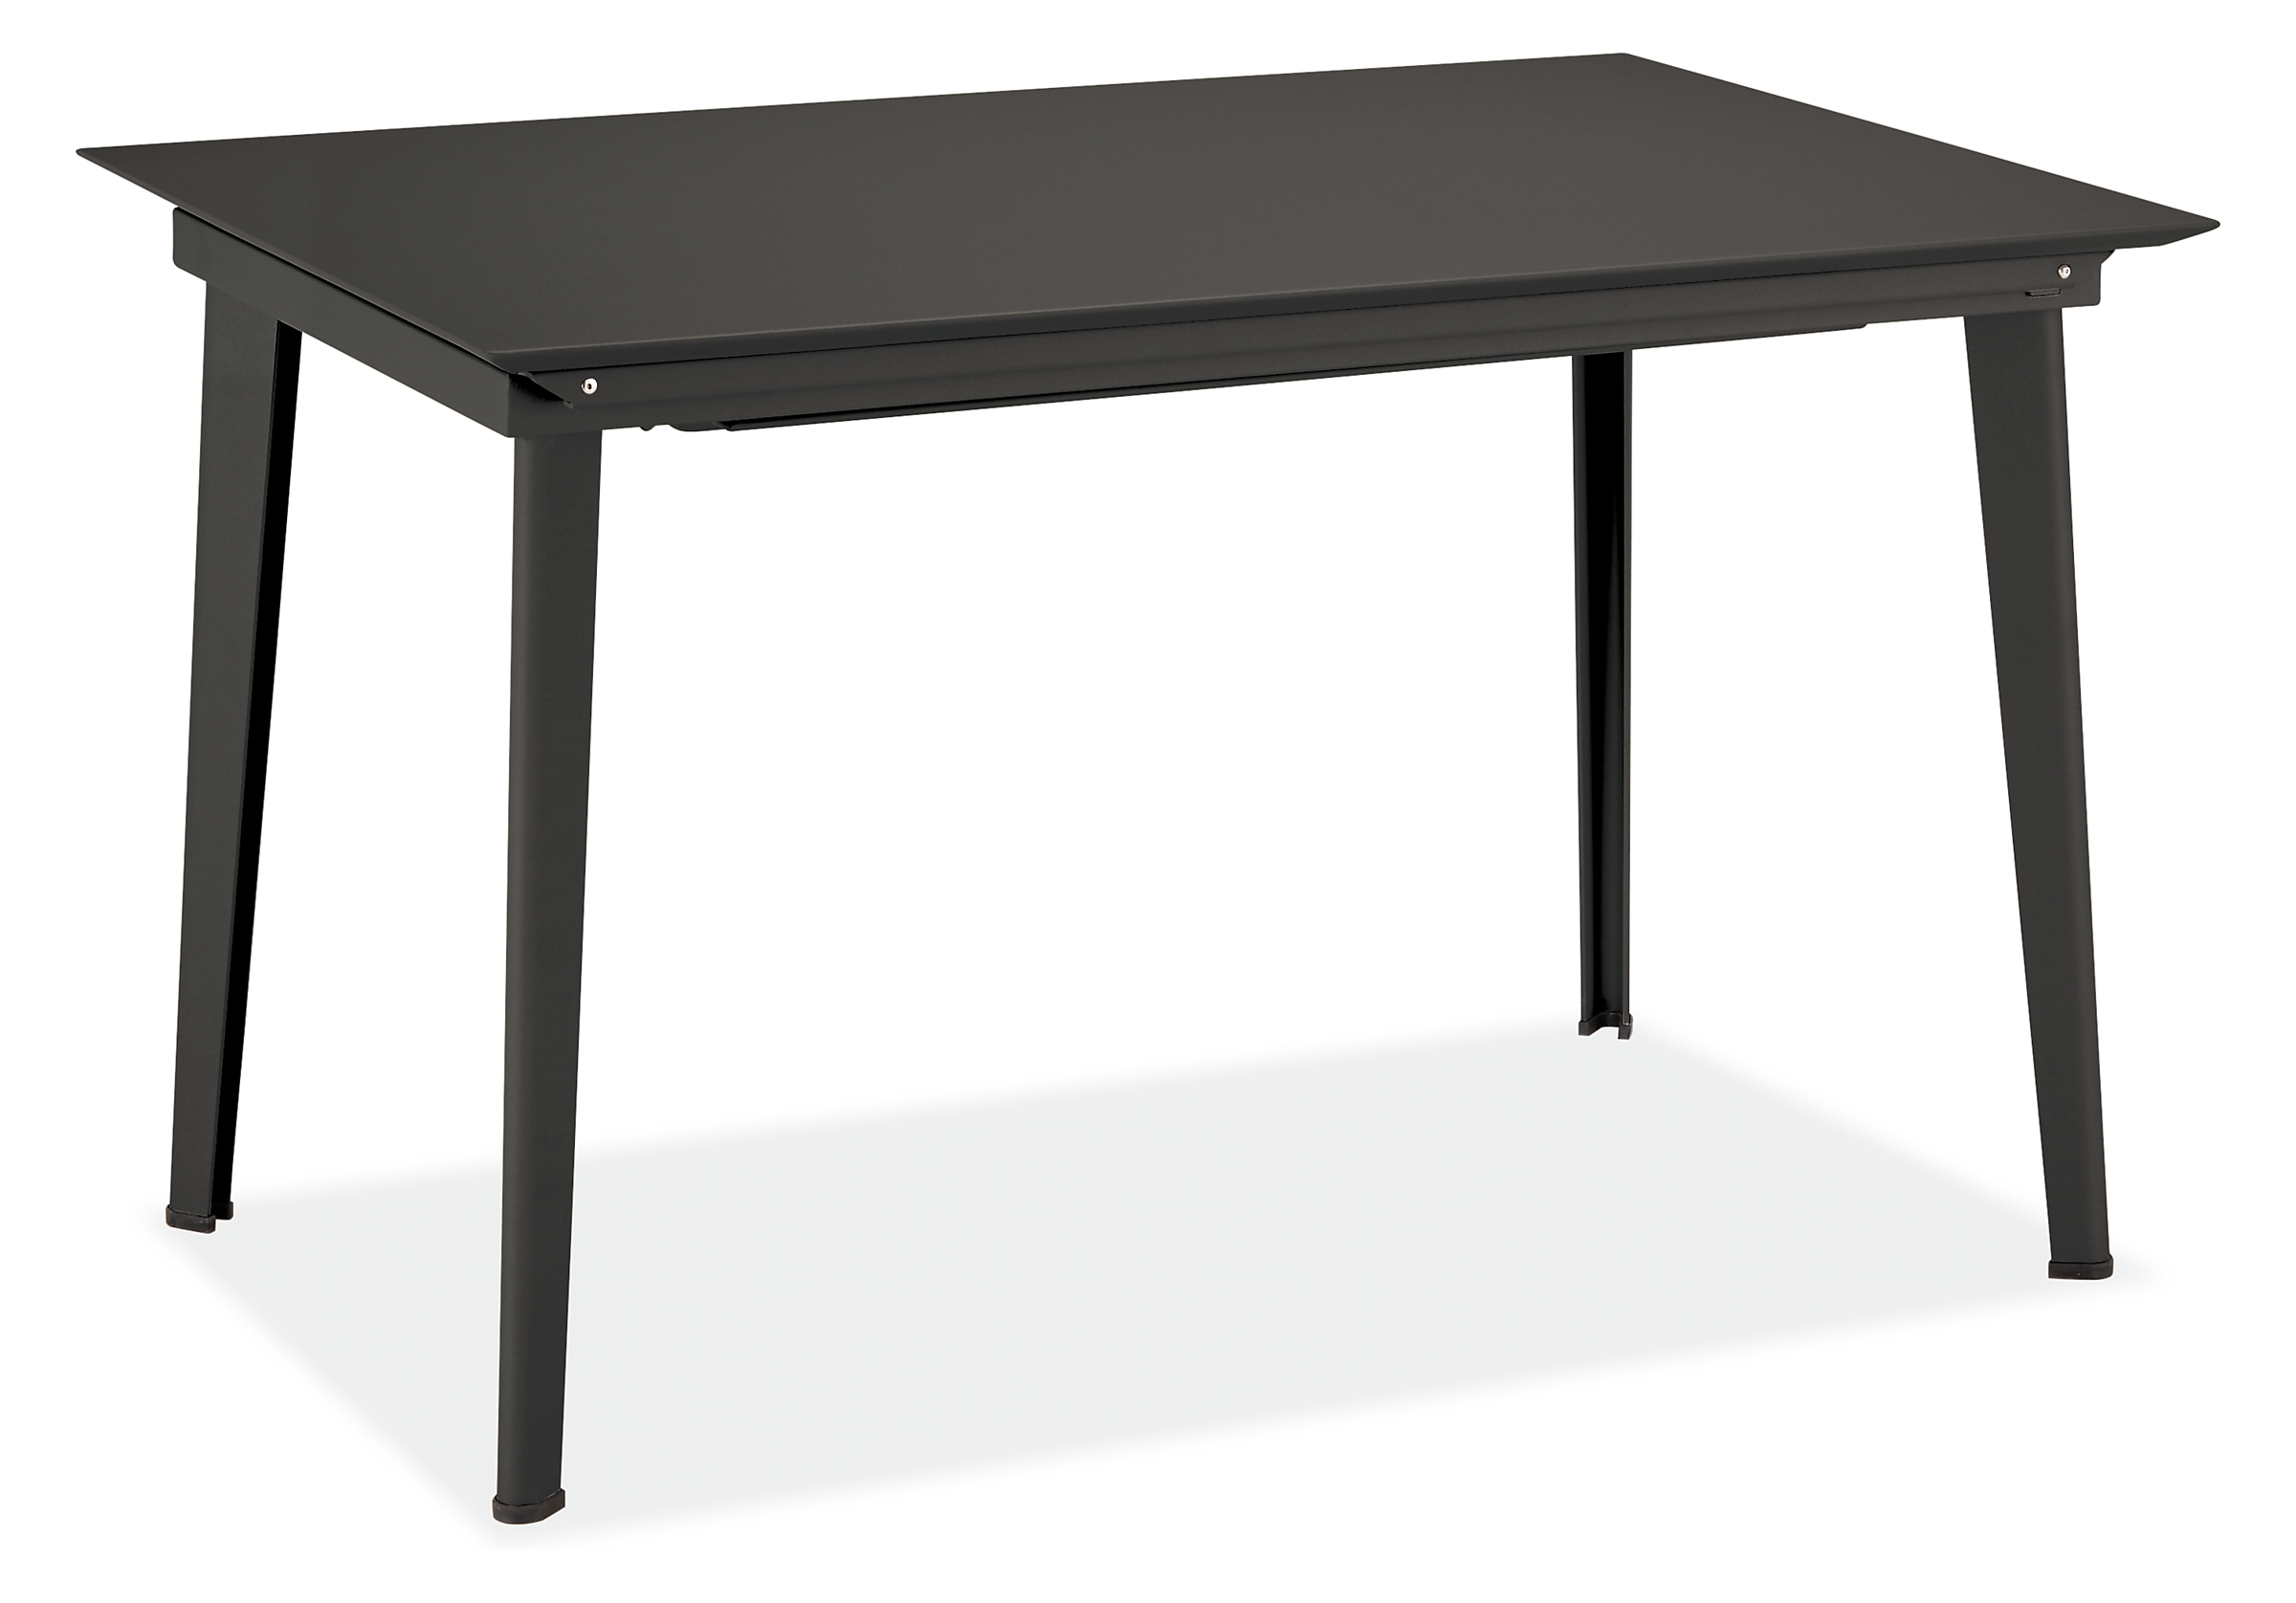 Bauer 47w 31d 29h Extension Table with One 20" Leaf in Graphite